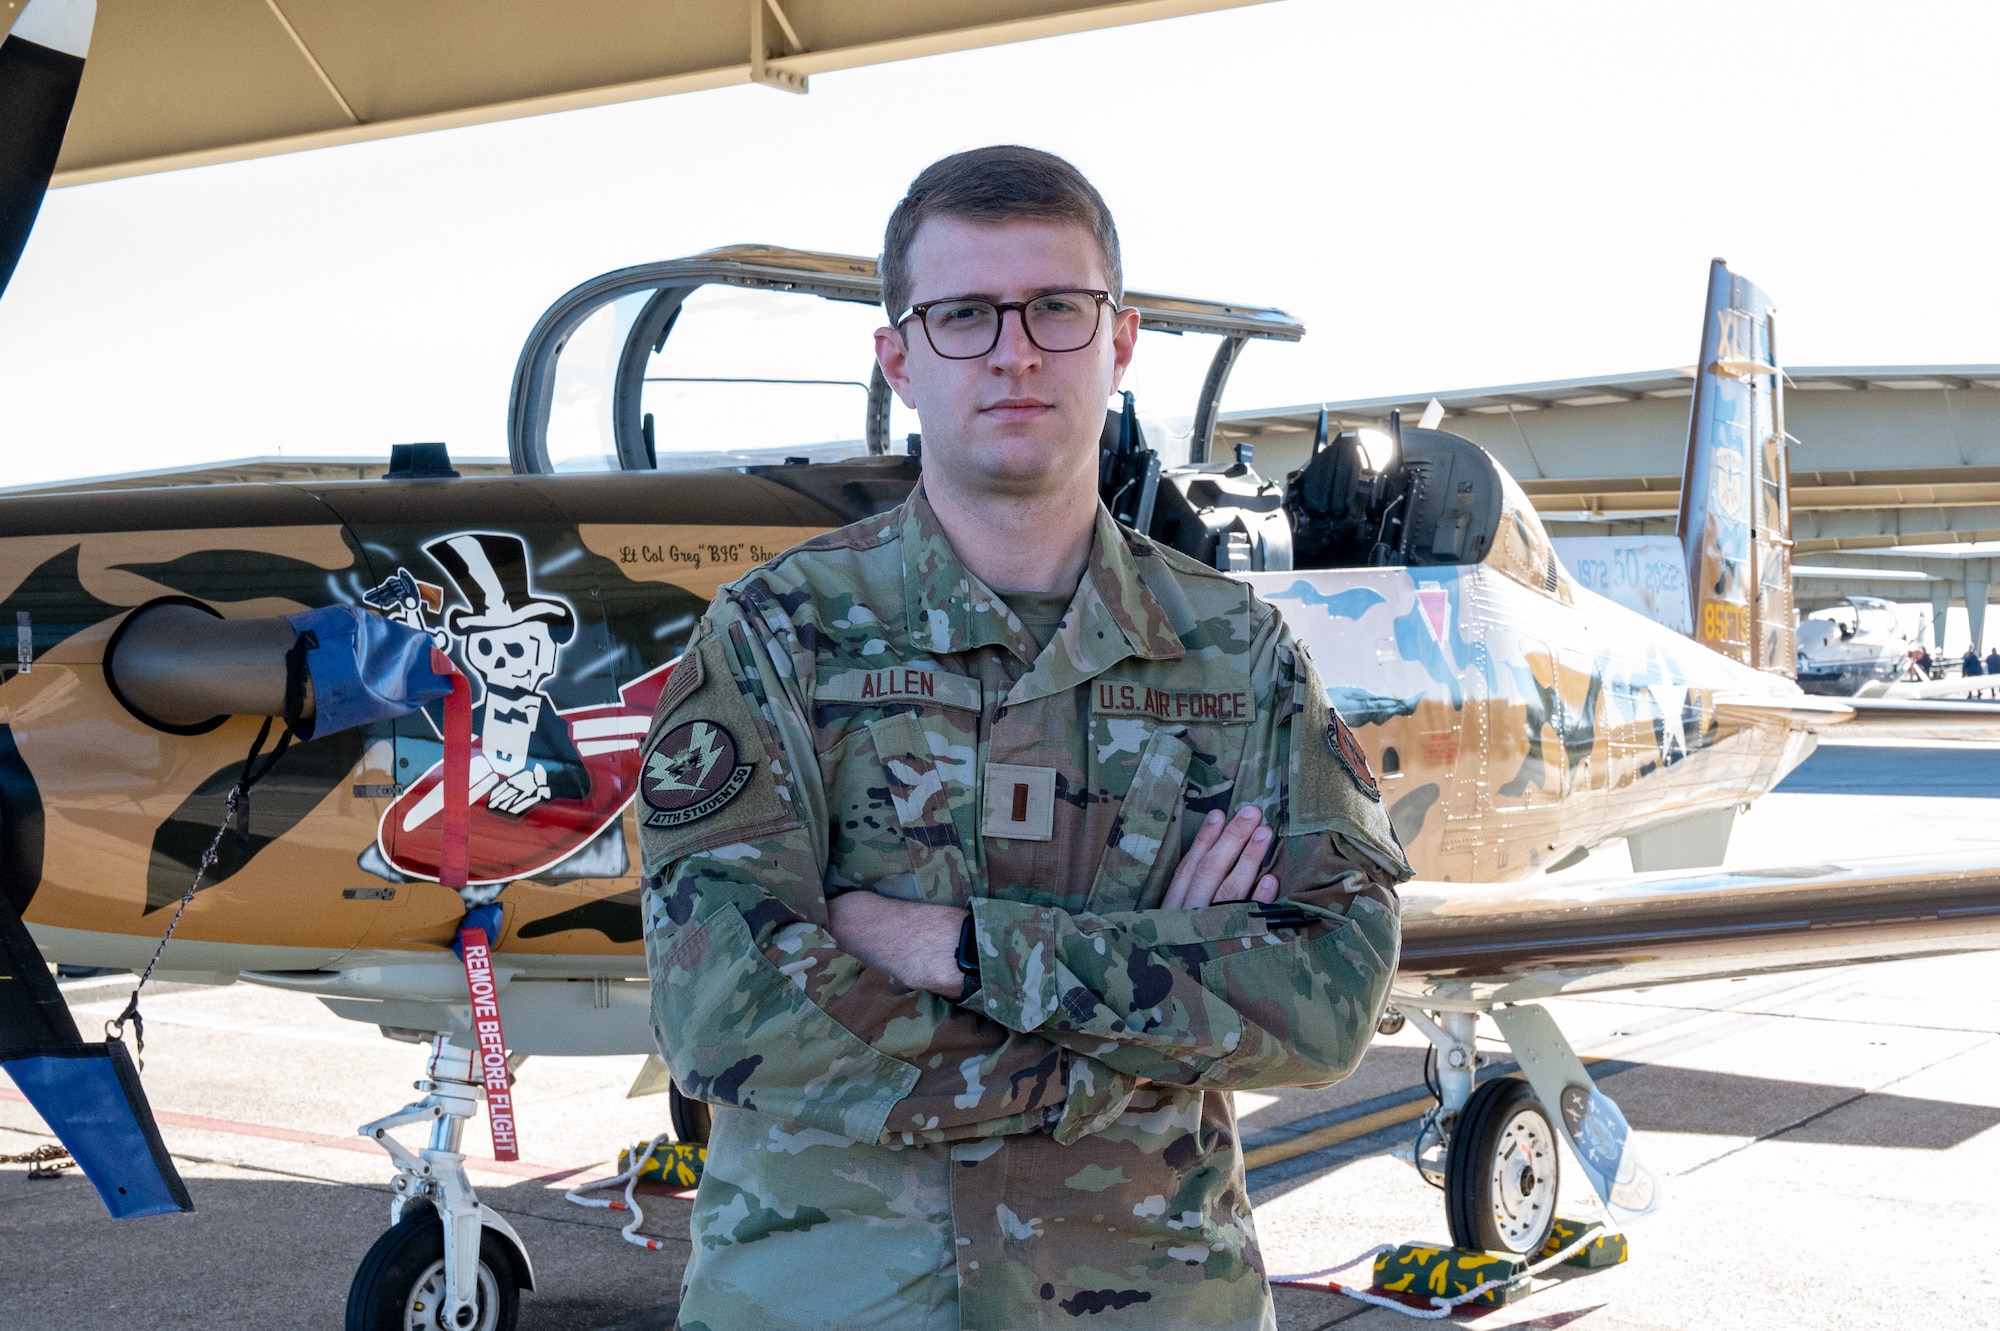 U.S. Air Force 2nd Lt. Garret Allen poses in front of a T-6A Texan II Laughlin Air Force Base, Texas, on Jan. 5, 2023. The T-6 is the first aircraft pilots get to fly during their year-long training. (U.S. Air Force photo by Senior Airman David Phaff)